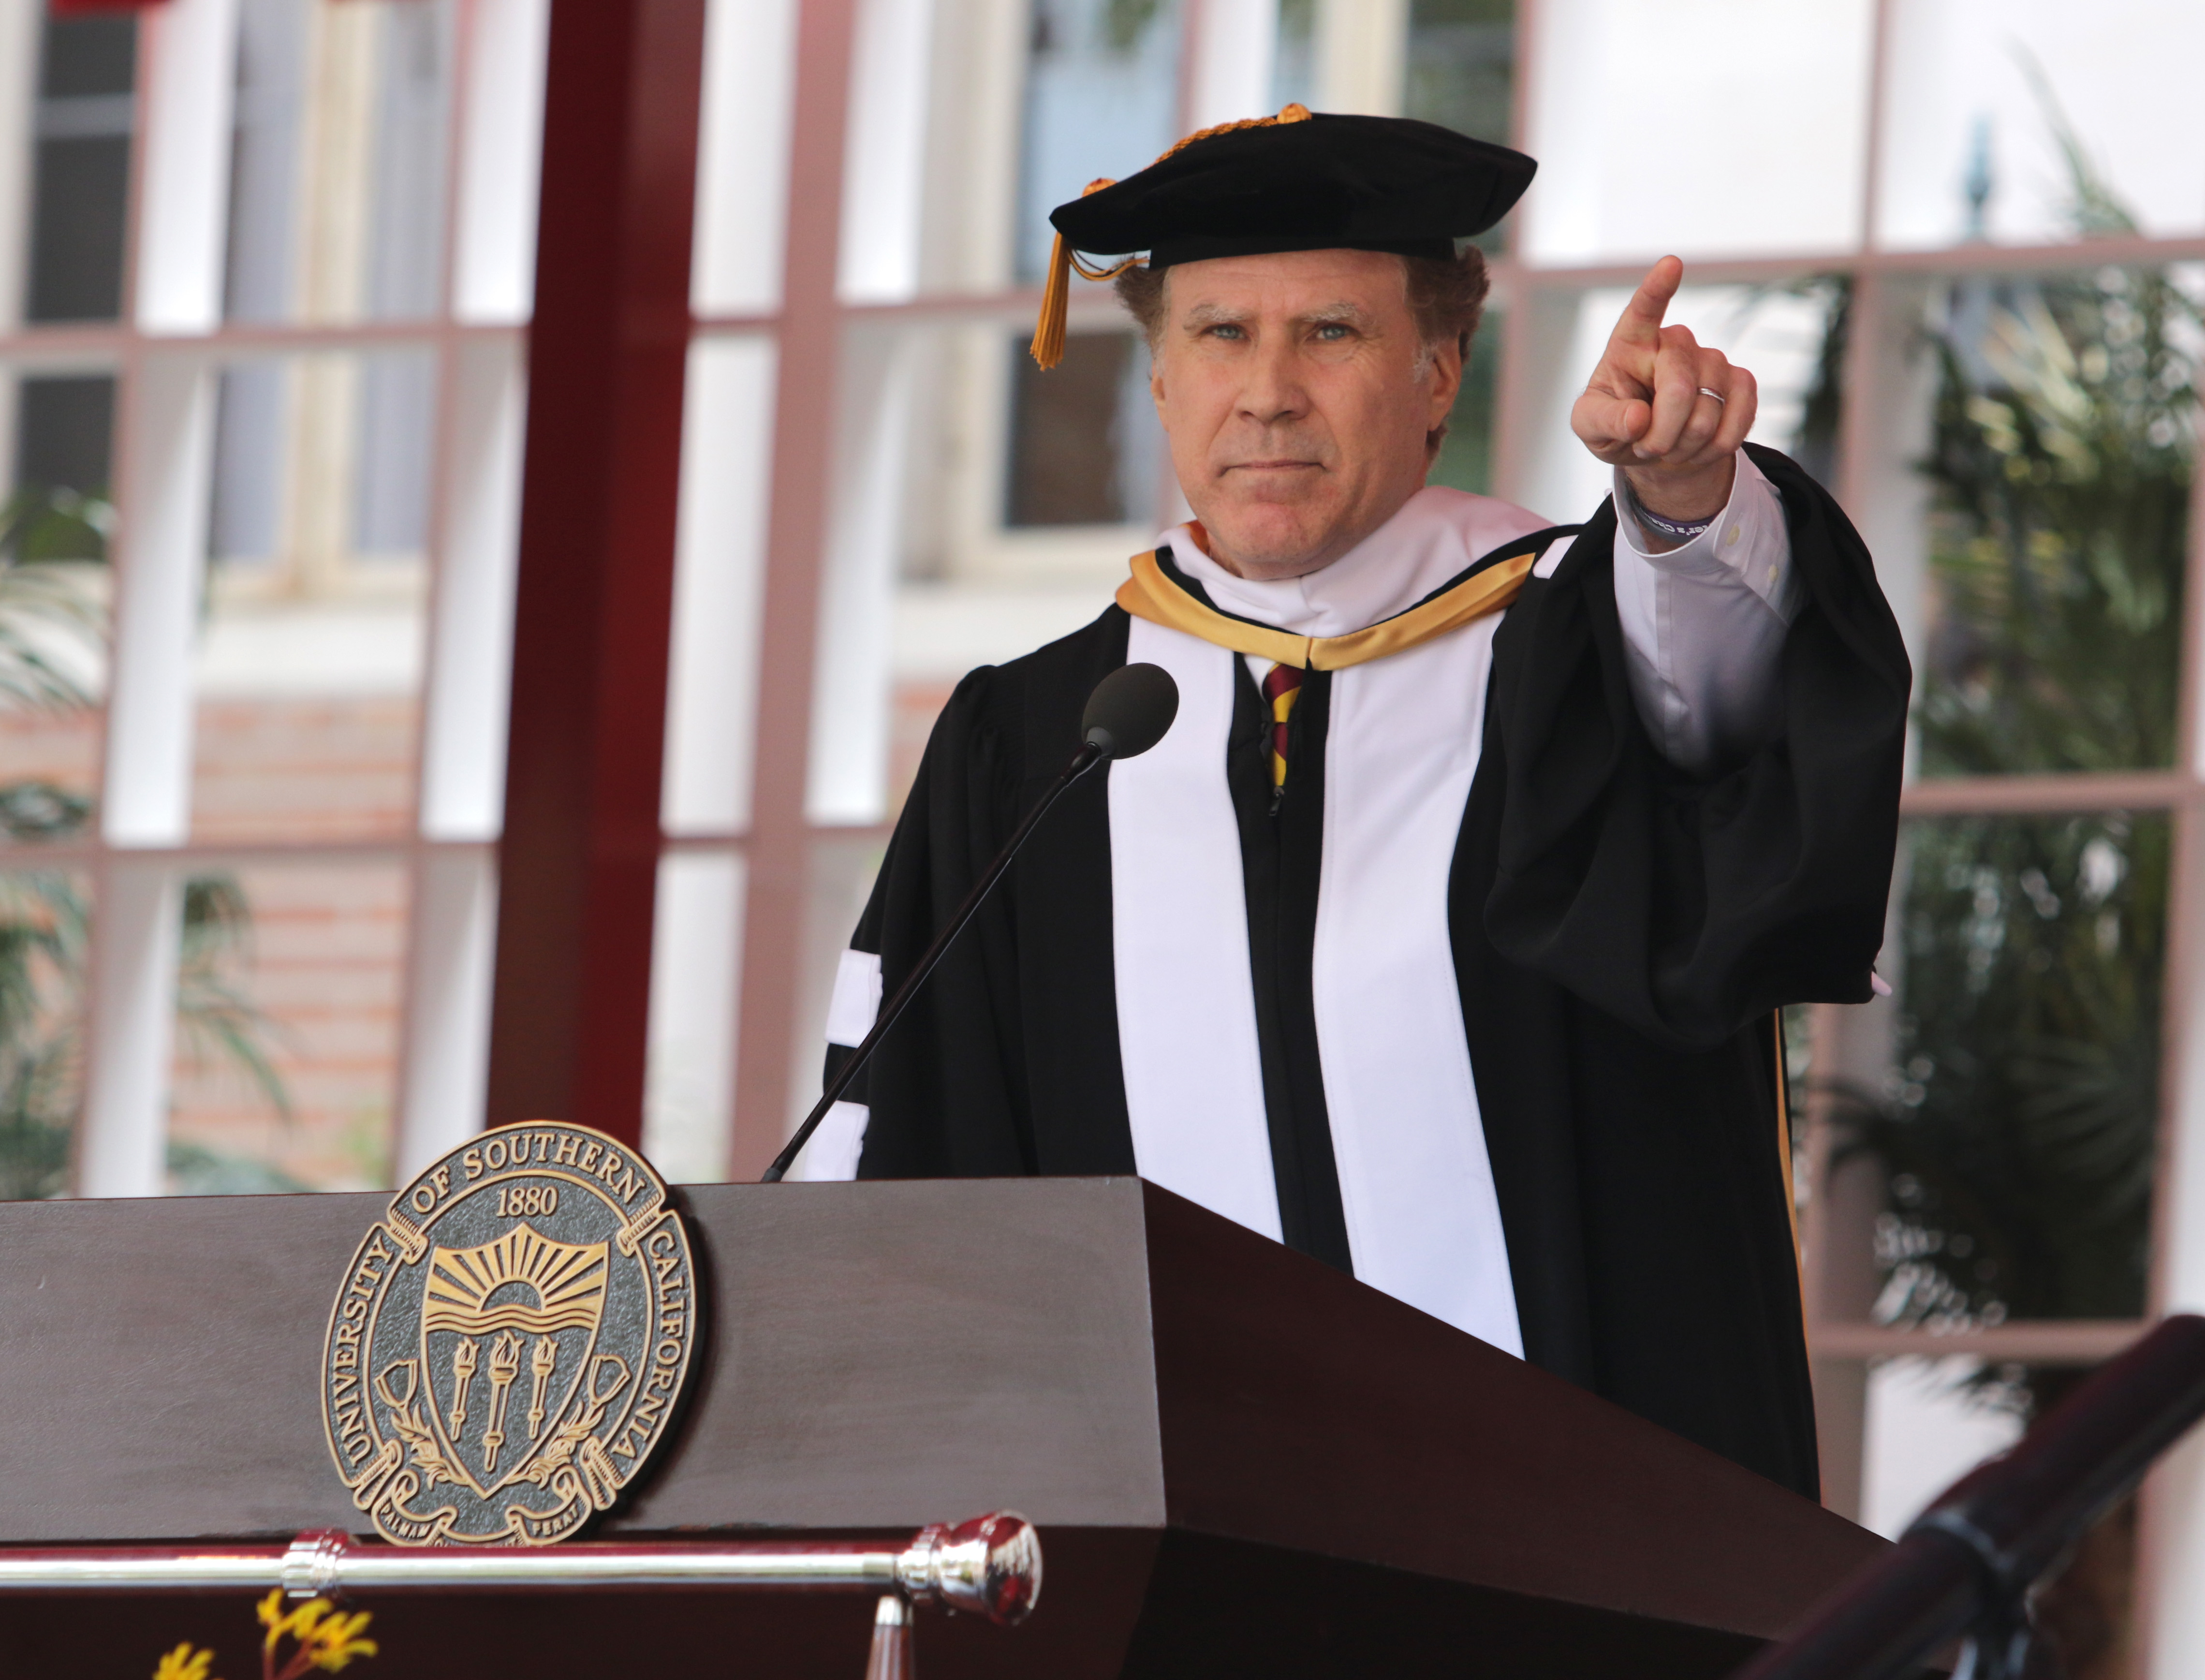 Will Ferrell delivers the commencement speech during the University Of Southern California 134th Commencement Ceremonies in Los Angeles, California, on May 12, 2017. | Source: Getty Images